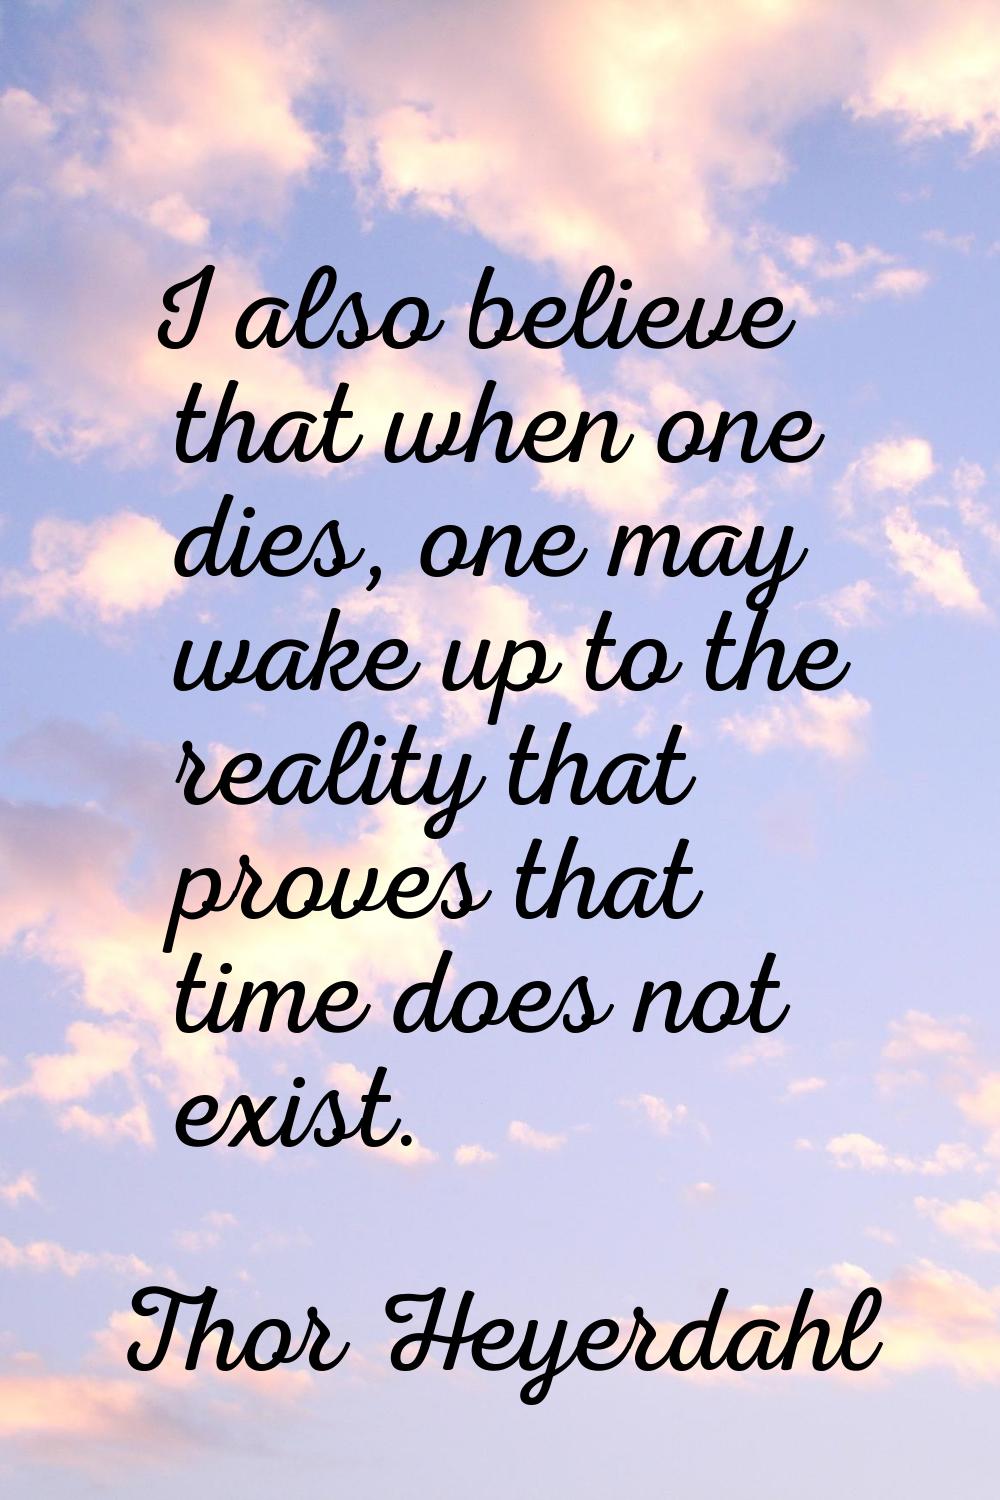 I also believe that when one dies, one may wake up to the reality that proves that time does not ex